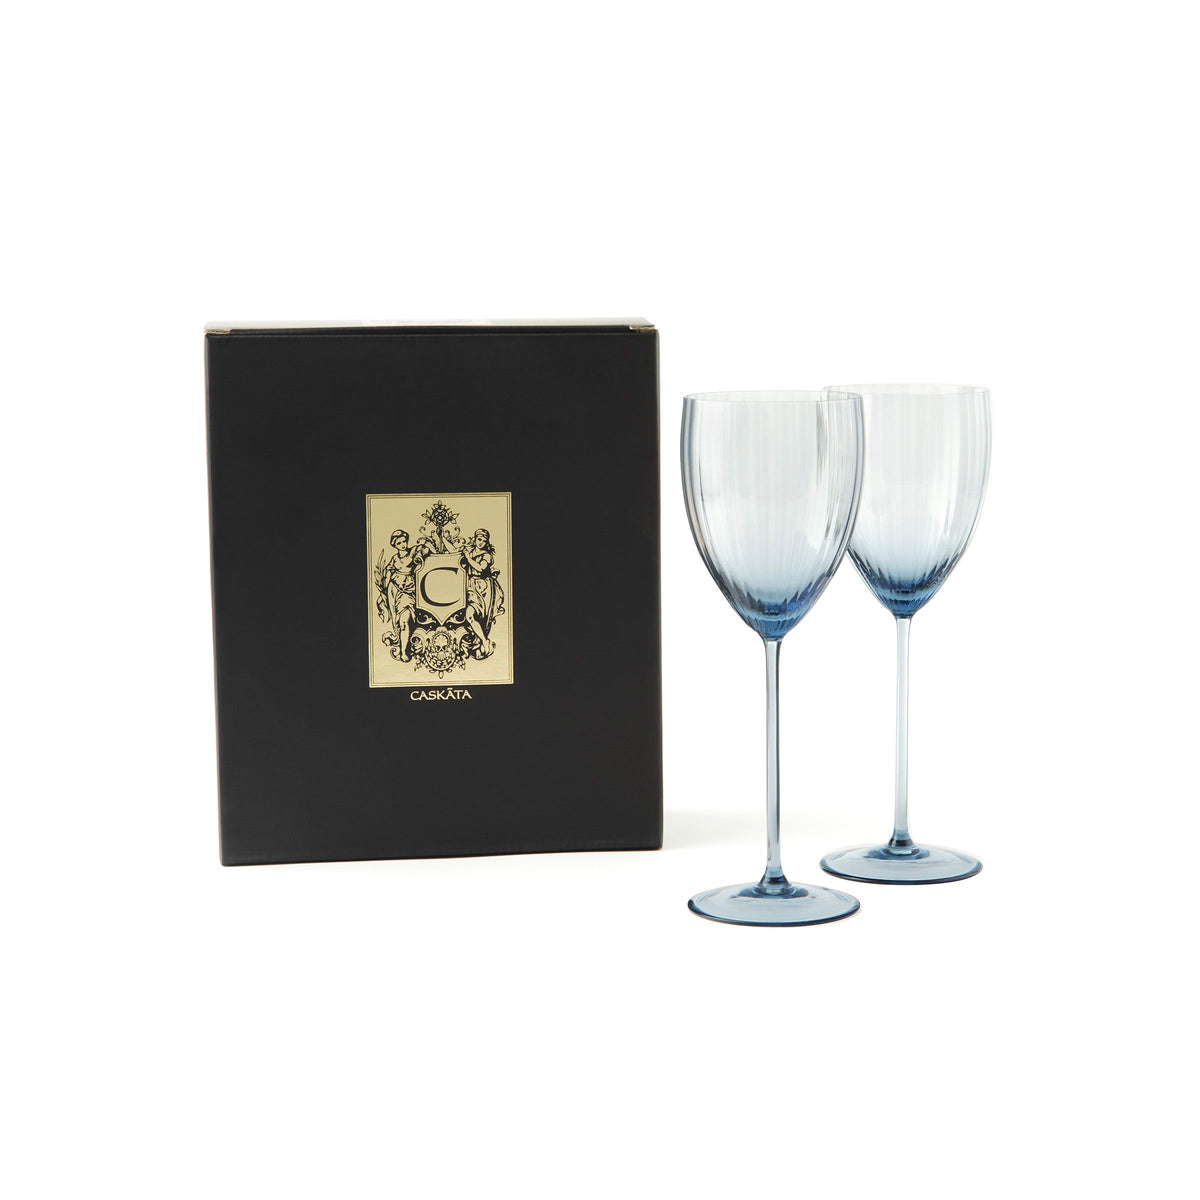 Quinn Ocean Blue Mouth-blown Crystal White Wine Glasses With Black and Gold Gift Box  from Caskata.